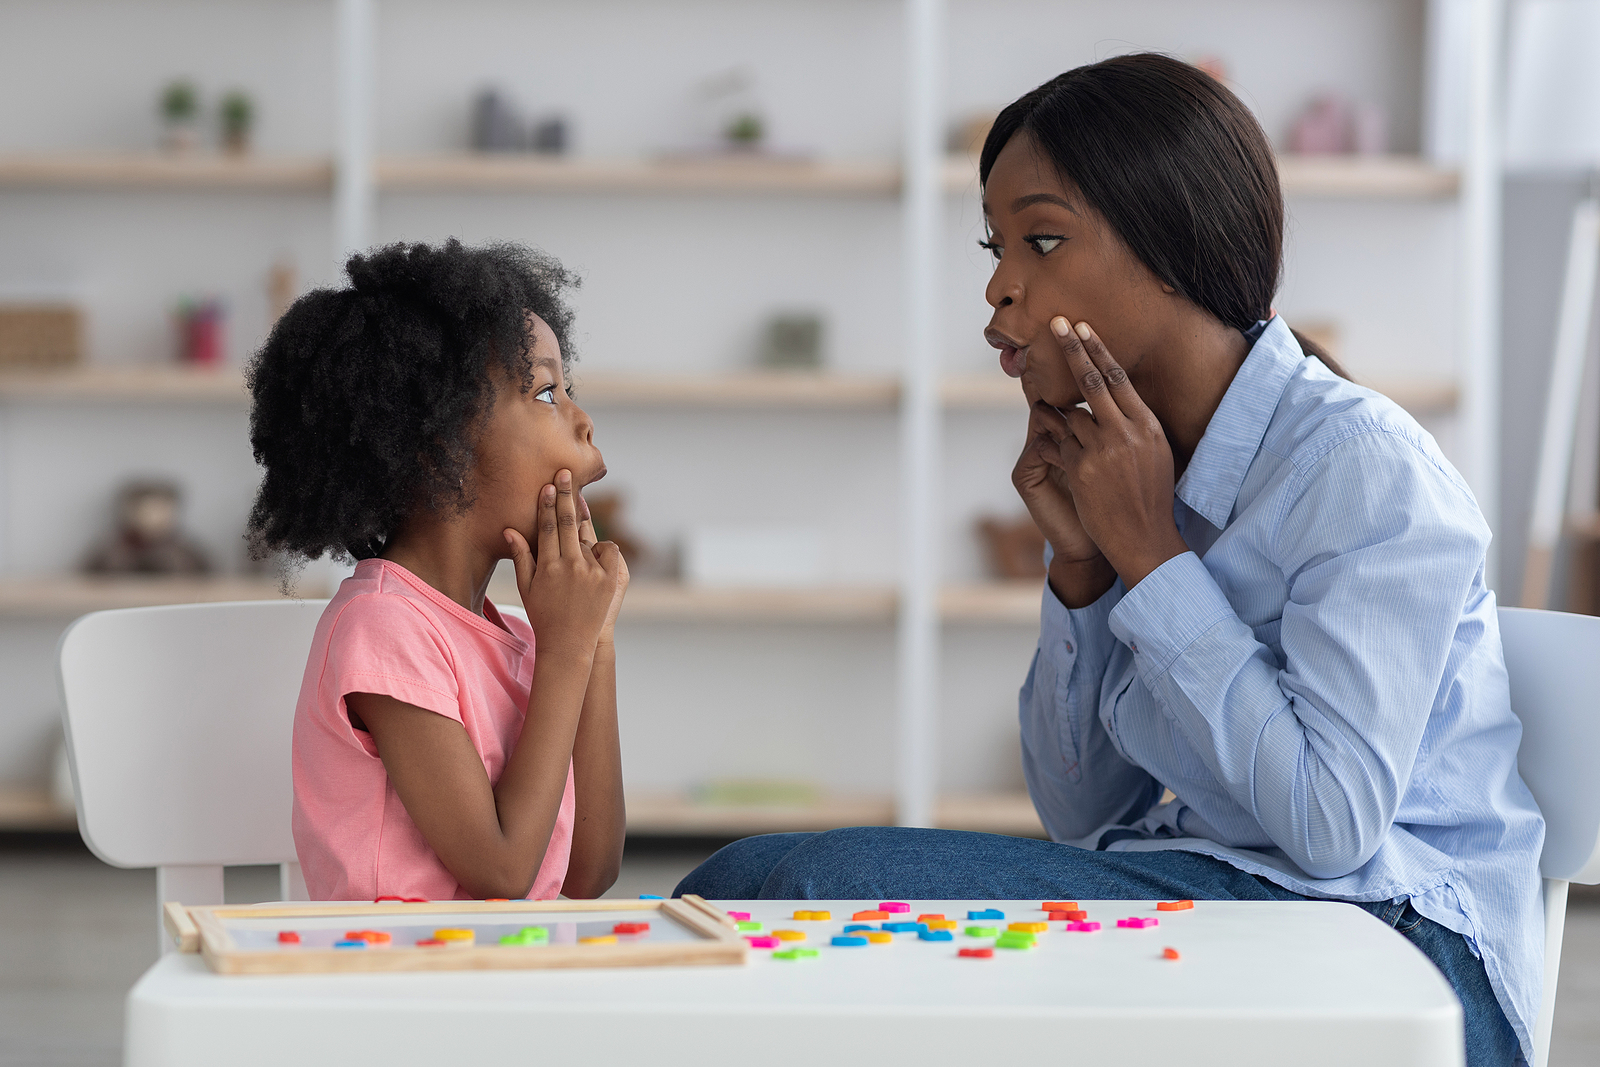 Why We Partner With the National Black Association for Speech-Language and Hearing